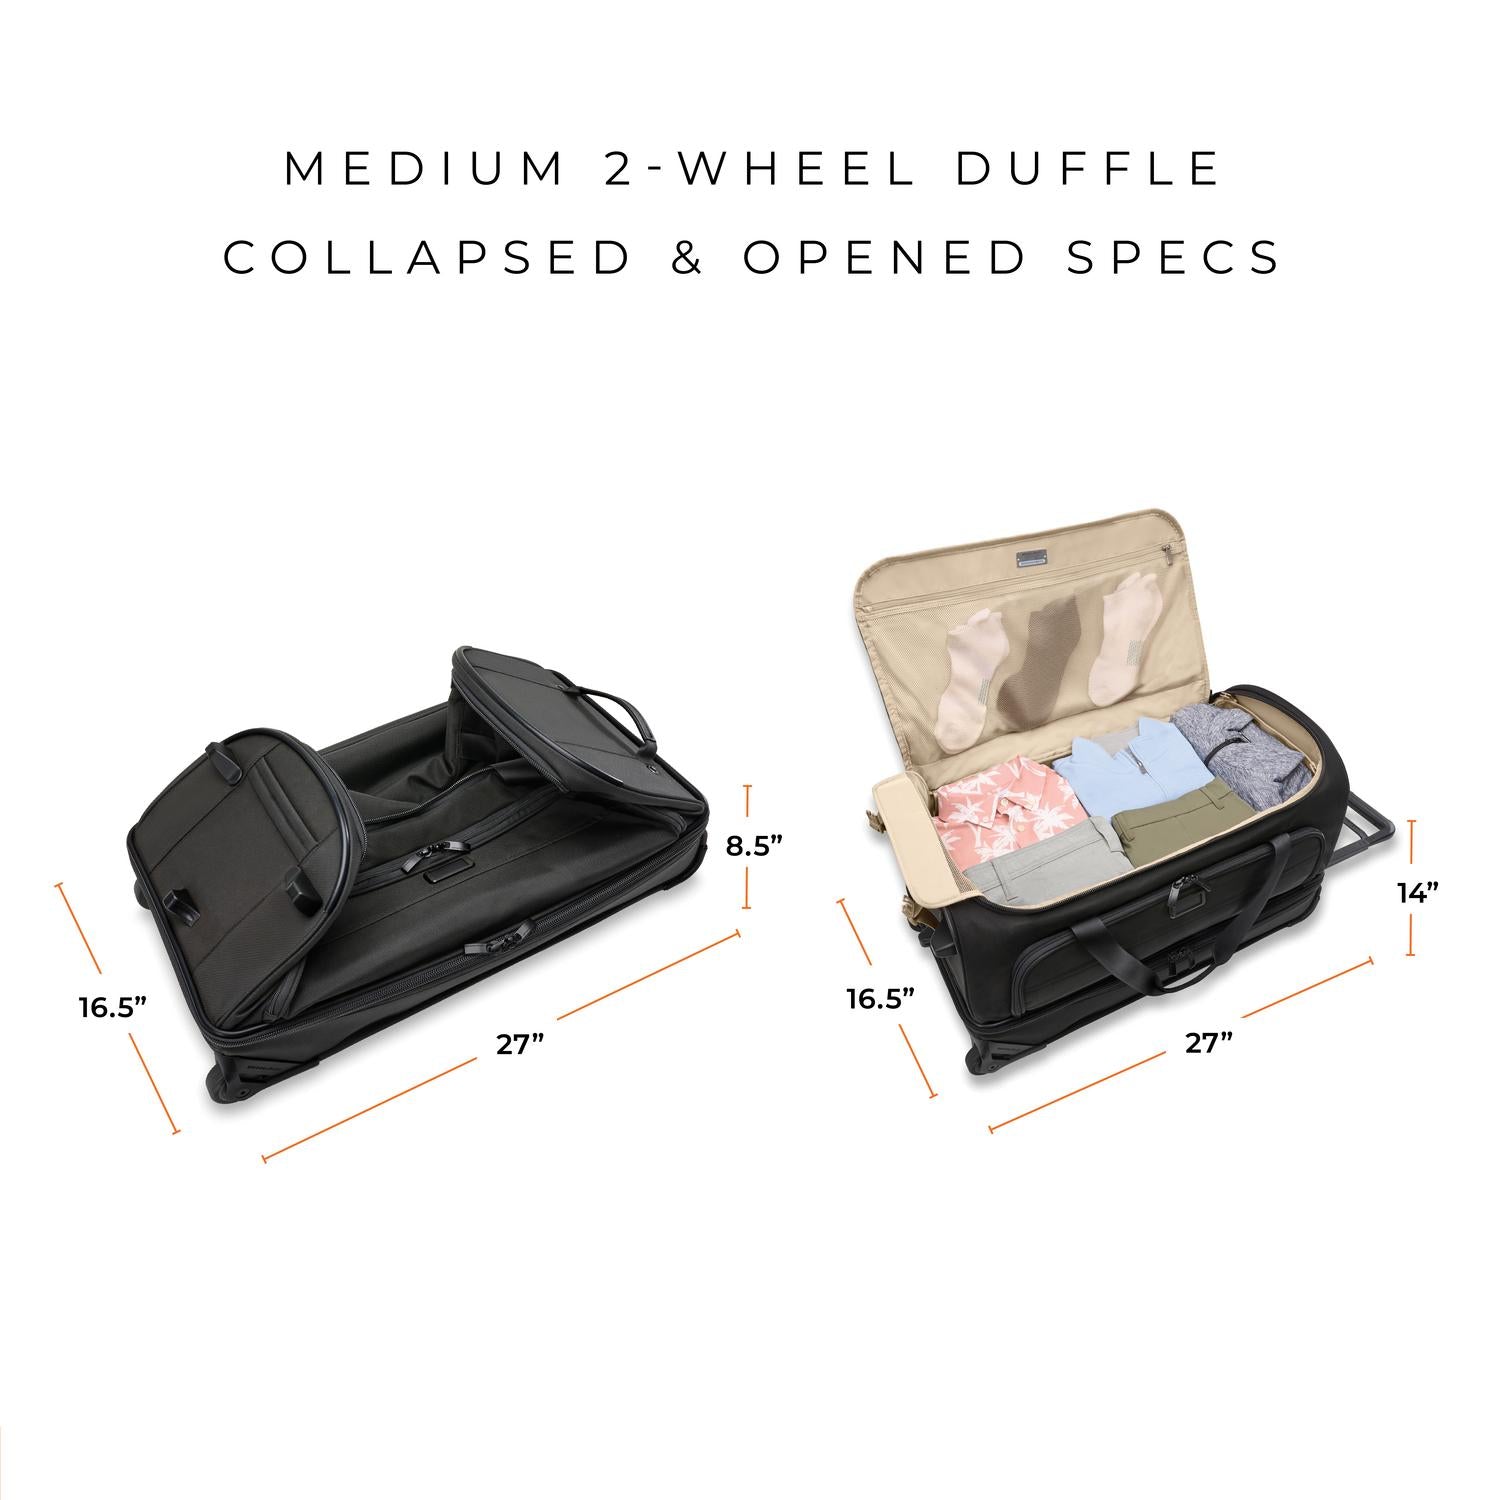 Briggs and Riley Medium Two-Wheel Duffle Collapsed & Open Specs, 16.5"x27"x8.5", 16.5"x27"x14" #color_black